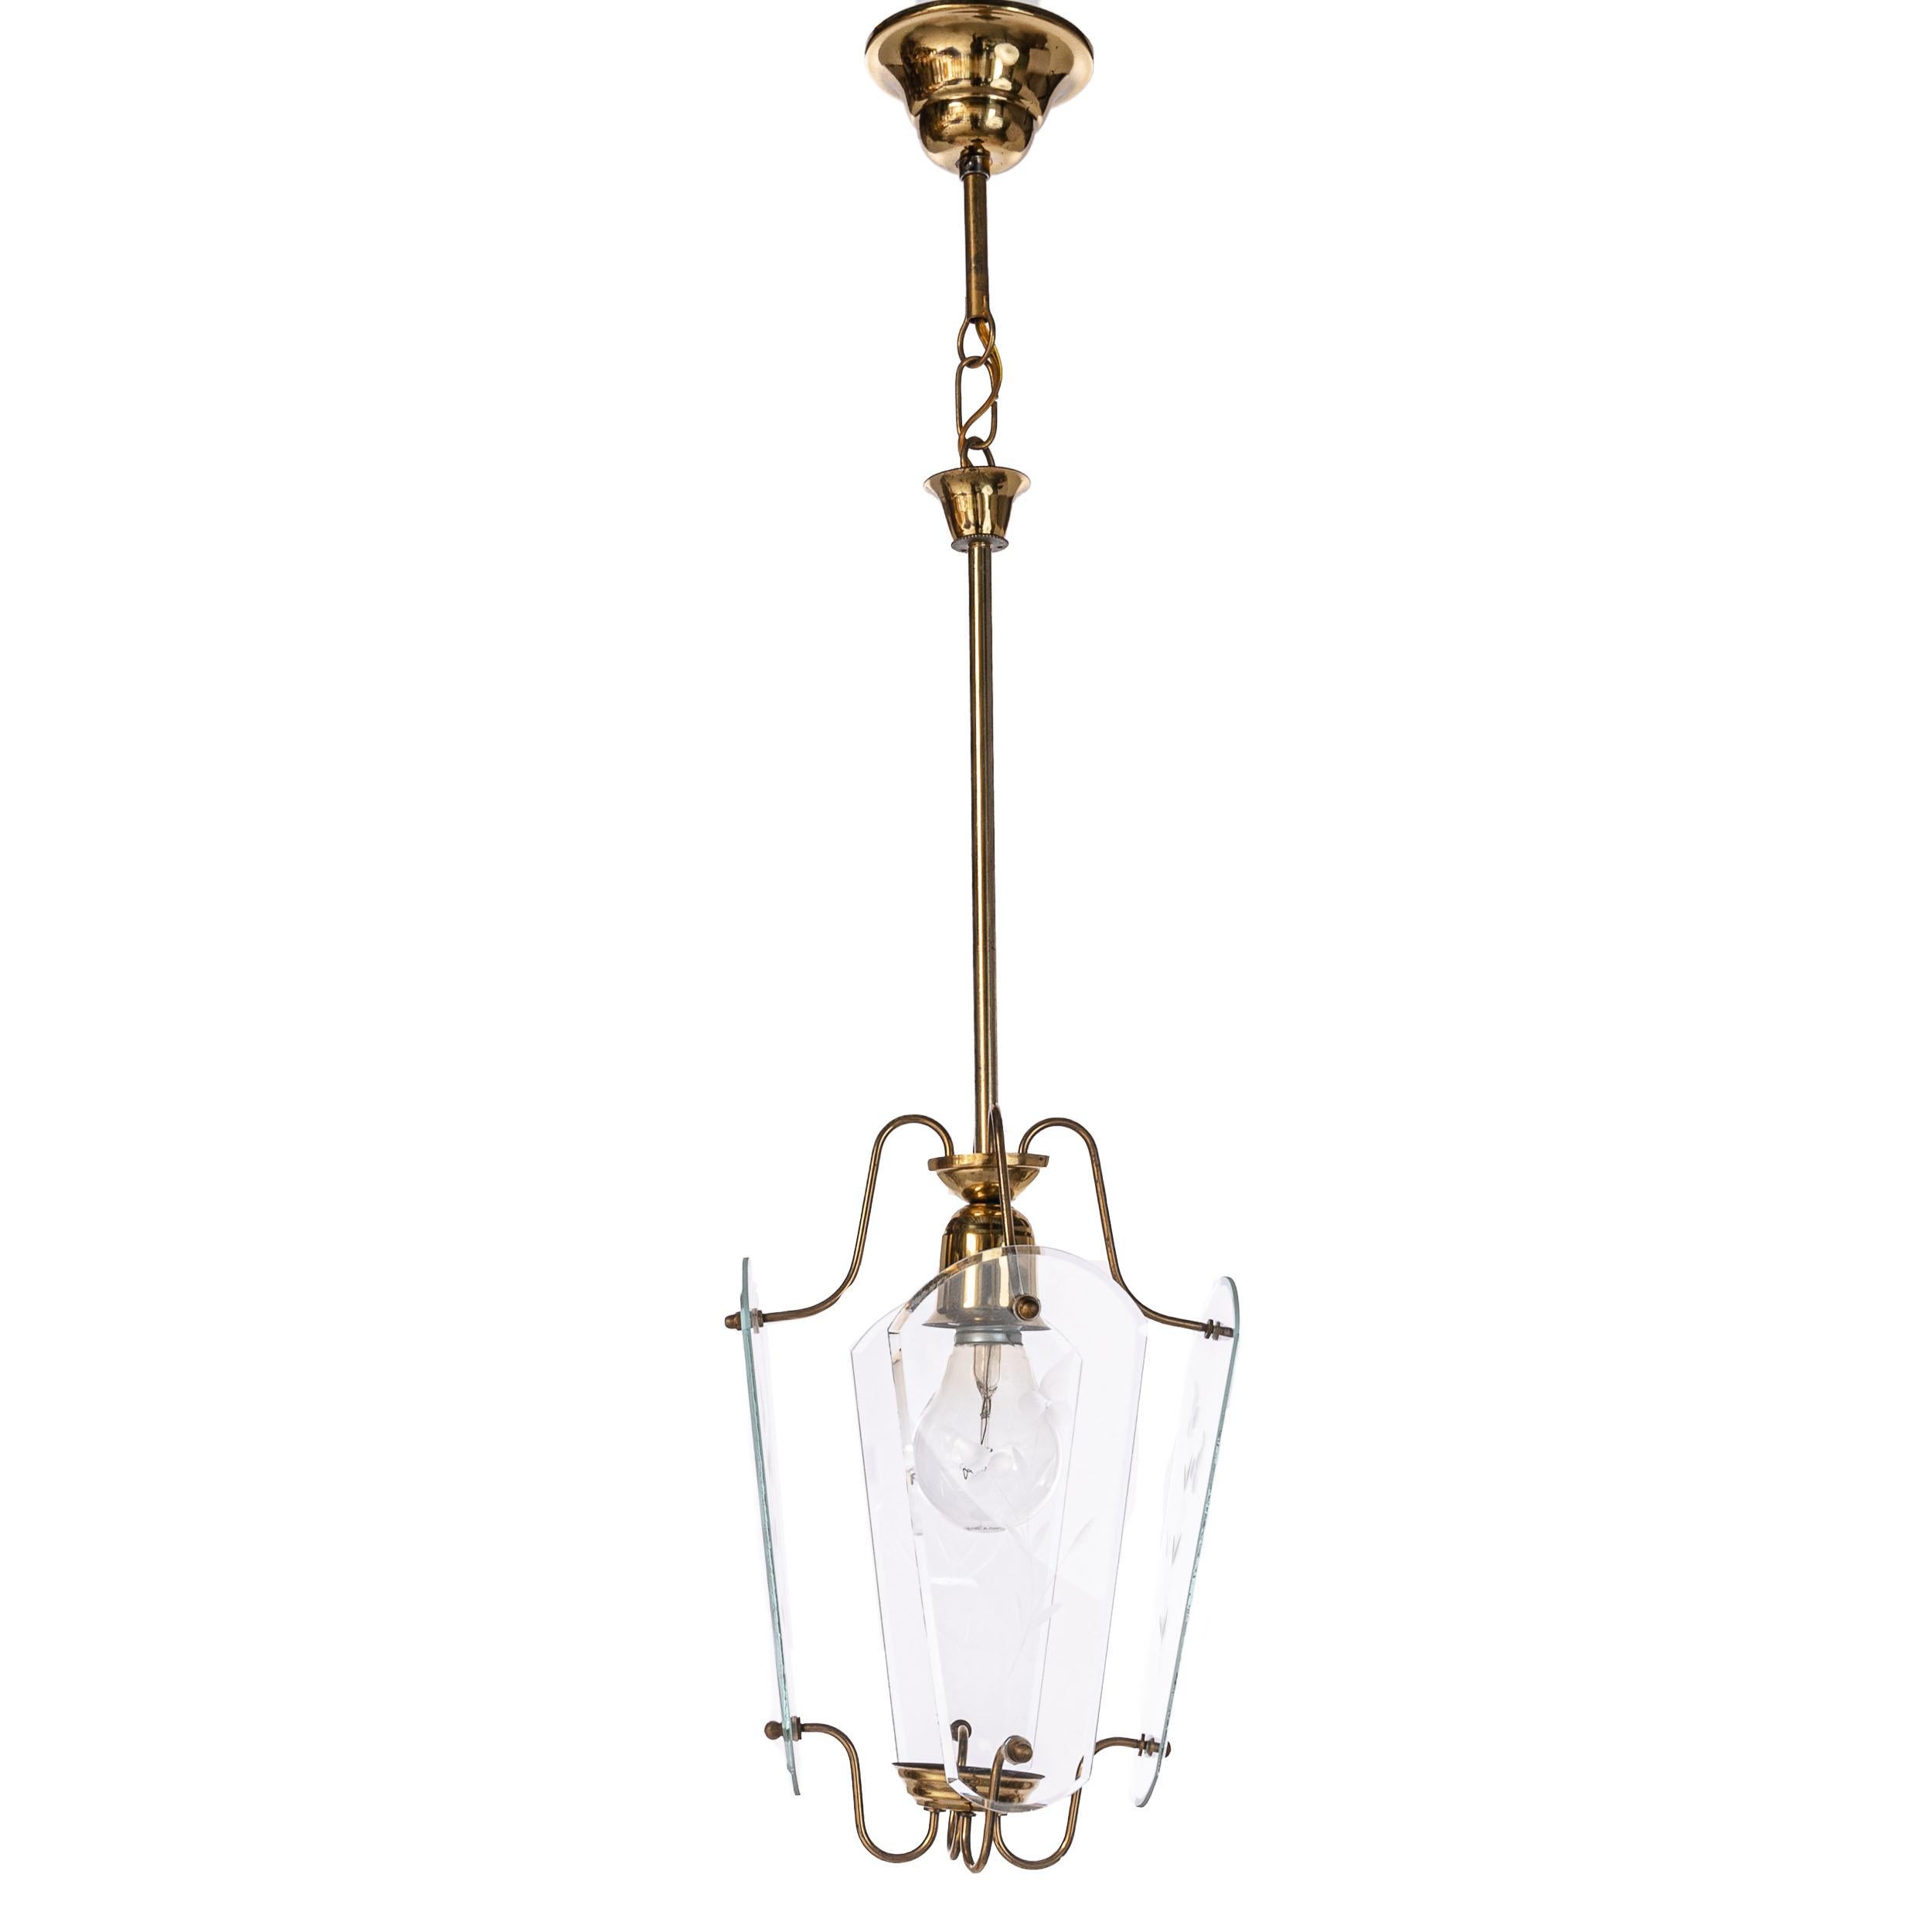 Delicate 1940s lantern. Consists of four etched glass panels, a brass frame and one E27 lightbulb.